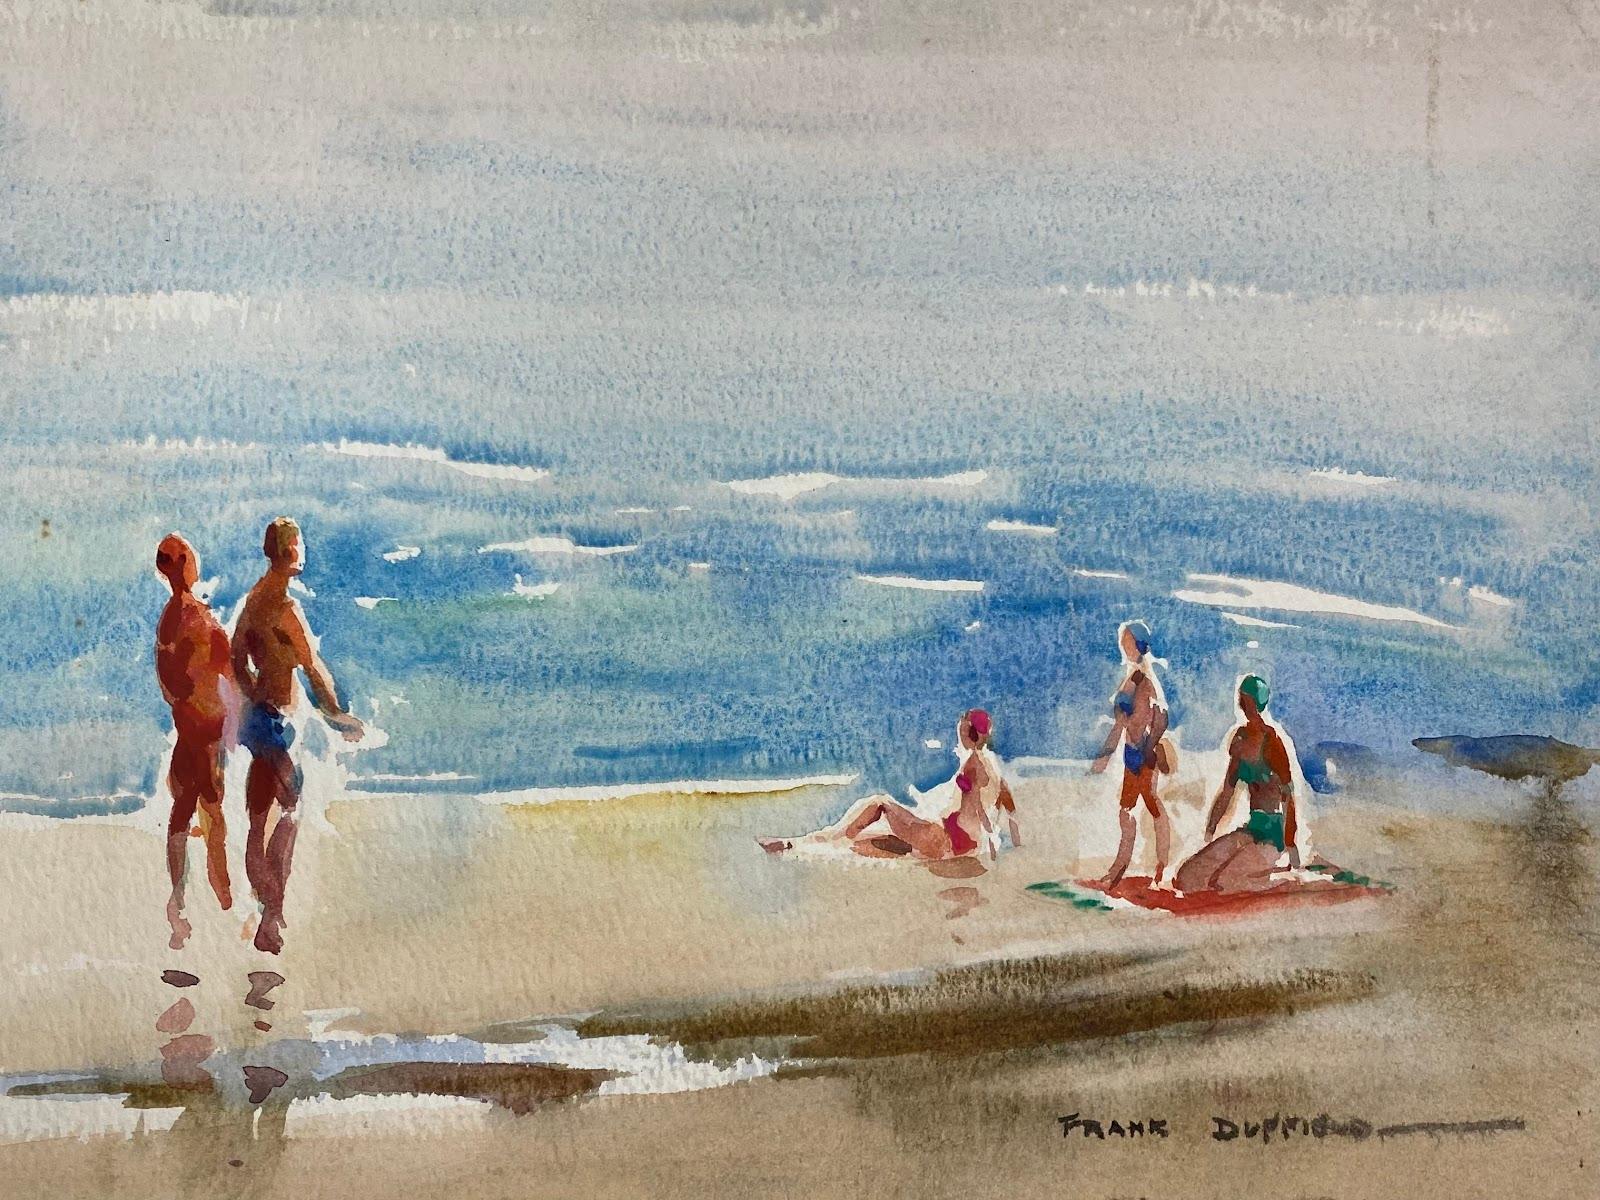 British Mid 20th Century Impressionist Painting Day At The Beach  - Art by Frank Duffield